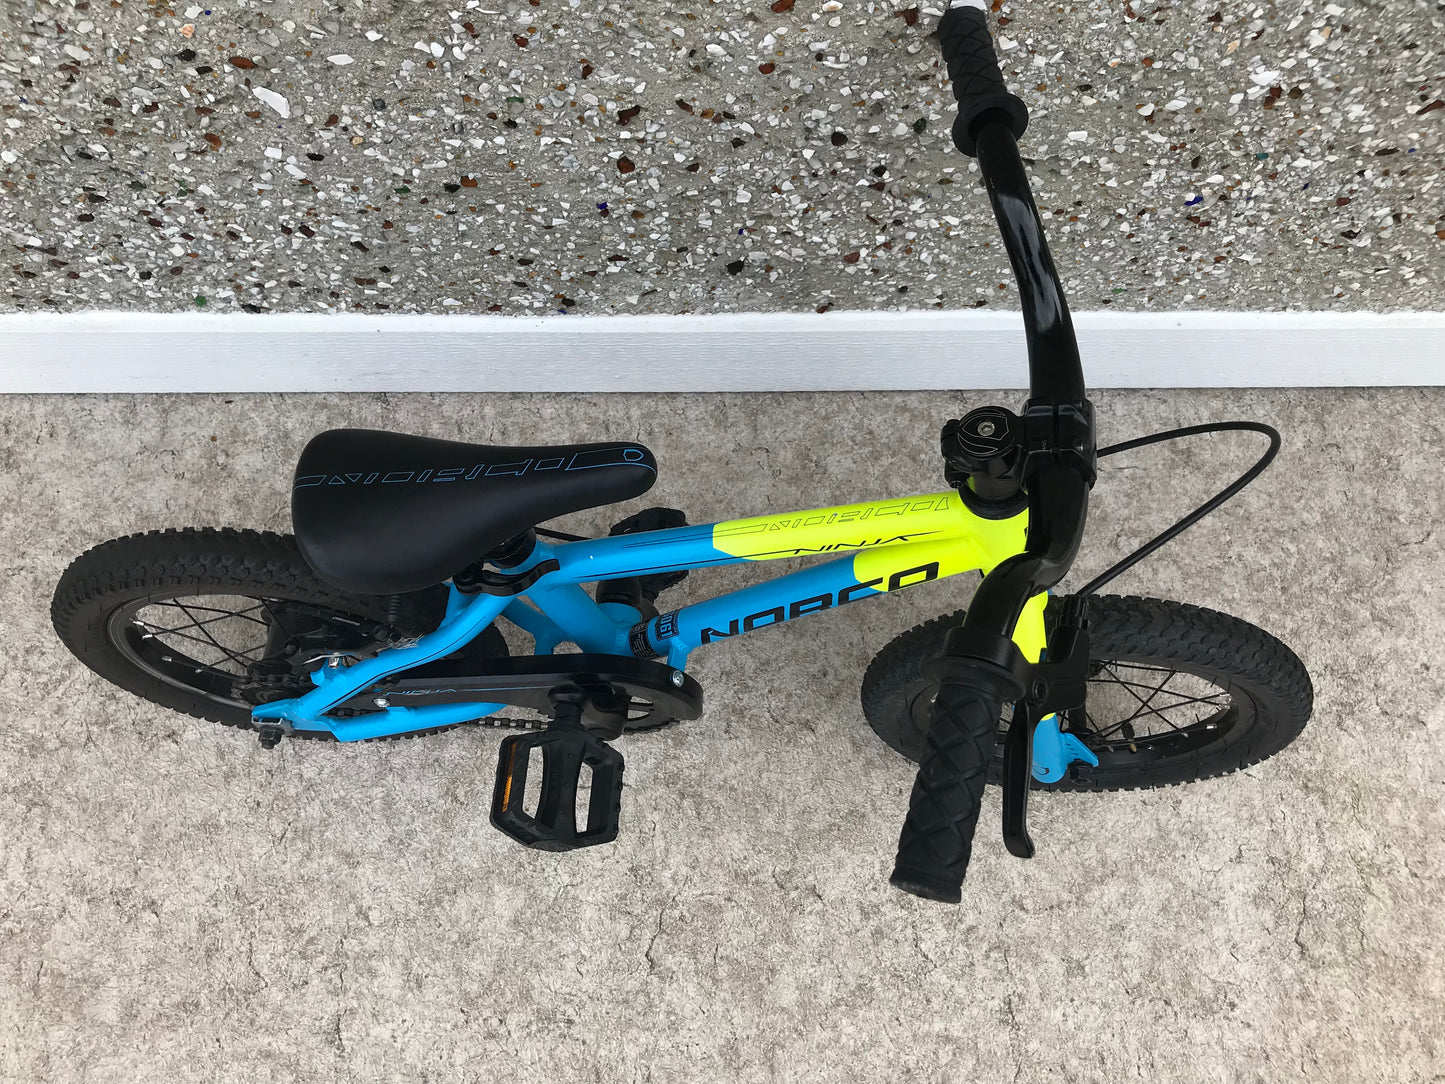 Bike Child Size 14 inch Norco Ninja Coaster Excellent As New